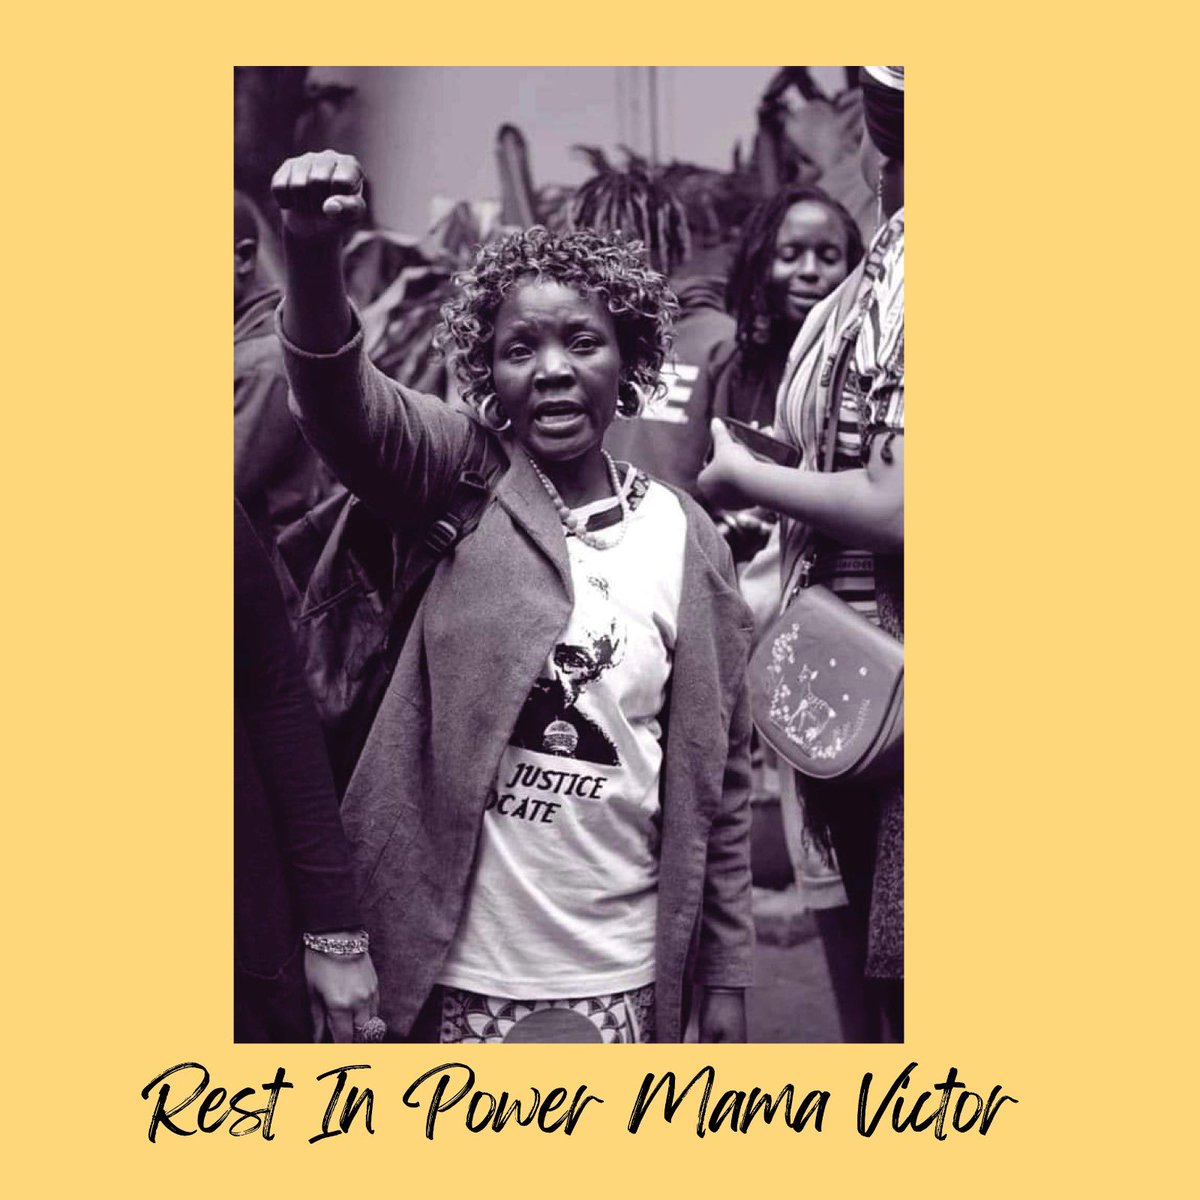 Today, we lay Mama Victor to rest. Her unwavering fight for justice, fueled by the loss of her sons, inspired us all. Her resilience and dedication will forever be remembered in our hearts. Rest in power, Mama Victor.🌹 #RestInPeace #MamaVictor